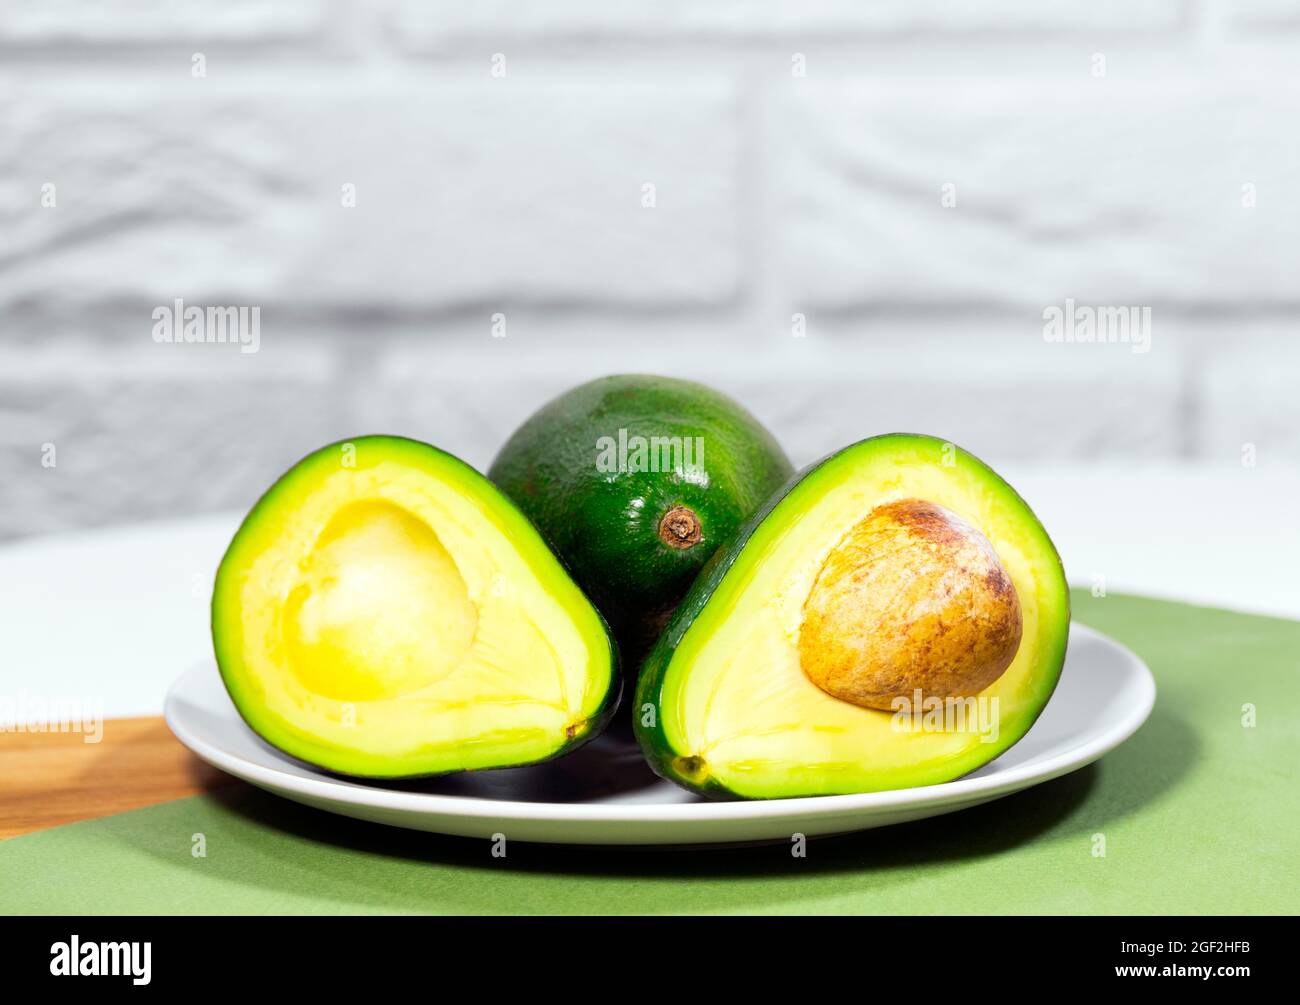 Halves of Ripe Avocado on plate served on table, Green and white background, Healthy oily food, Keto diet, Close up Stock Photo